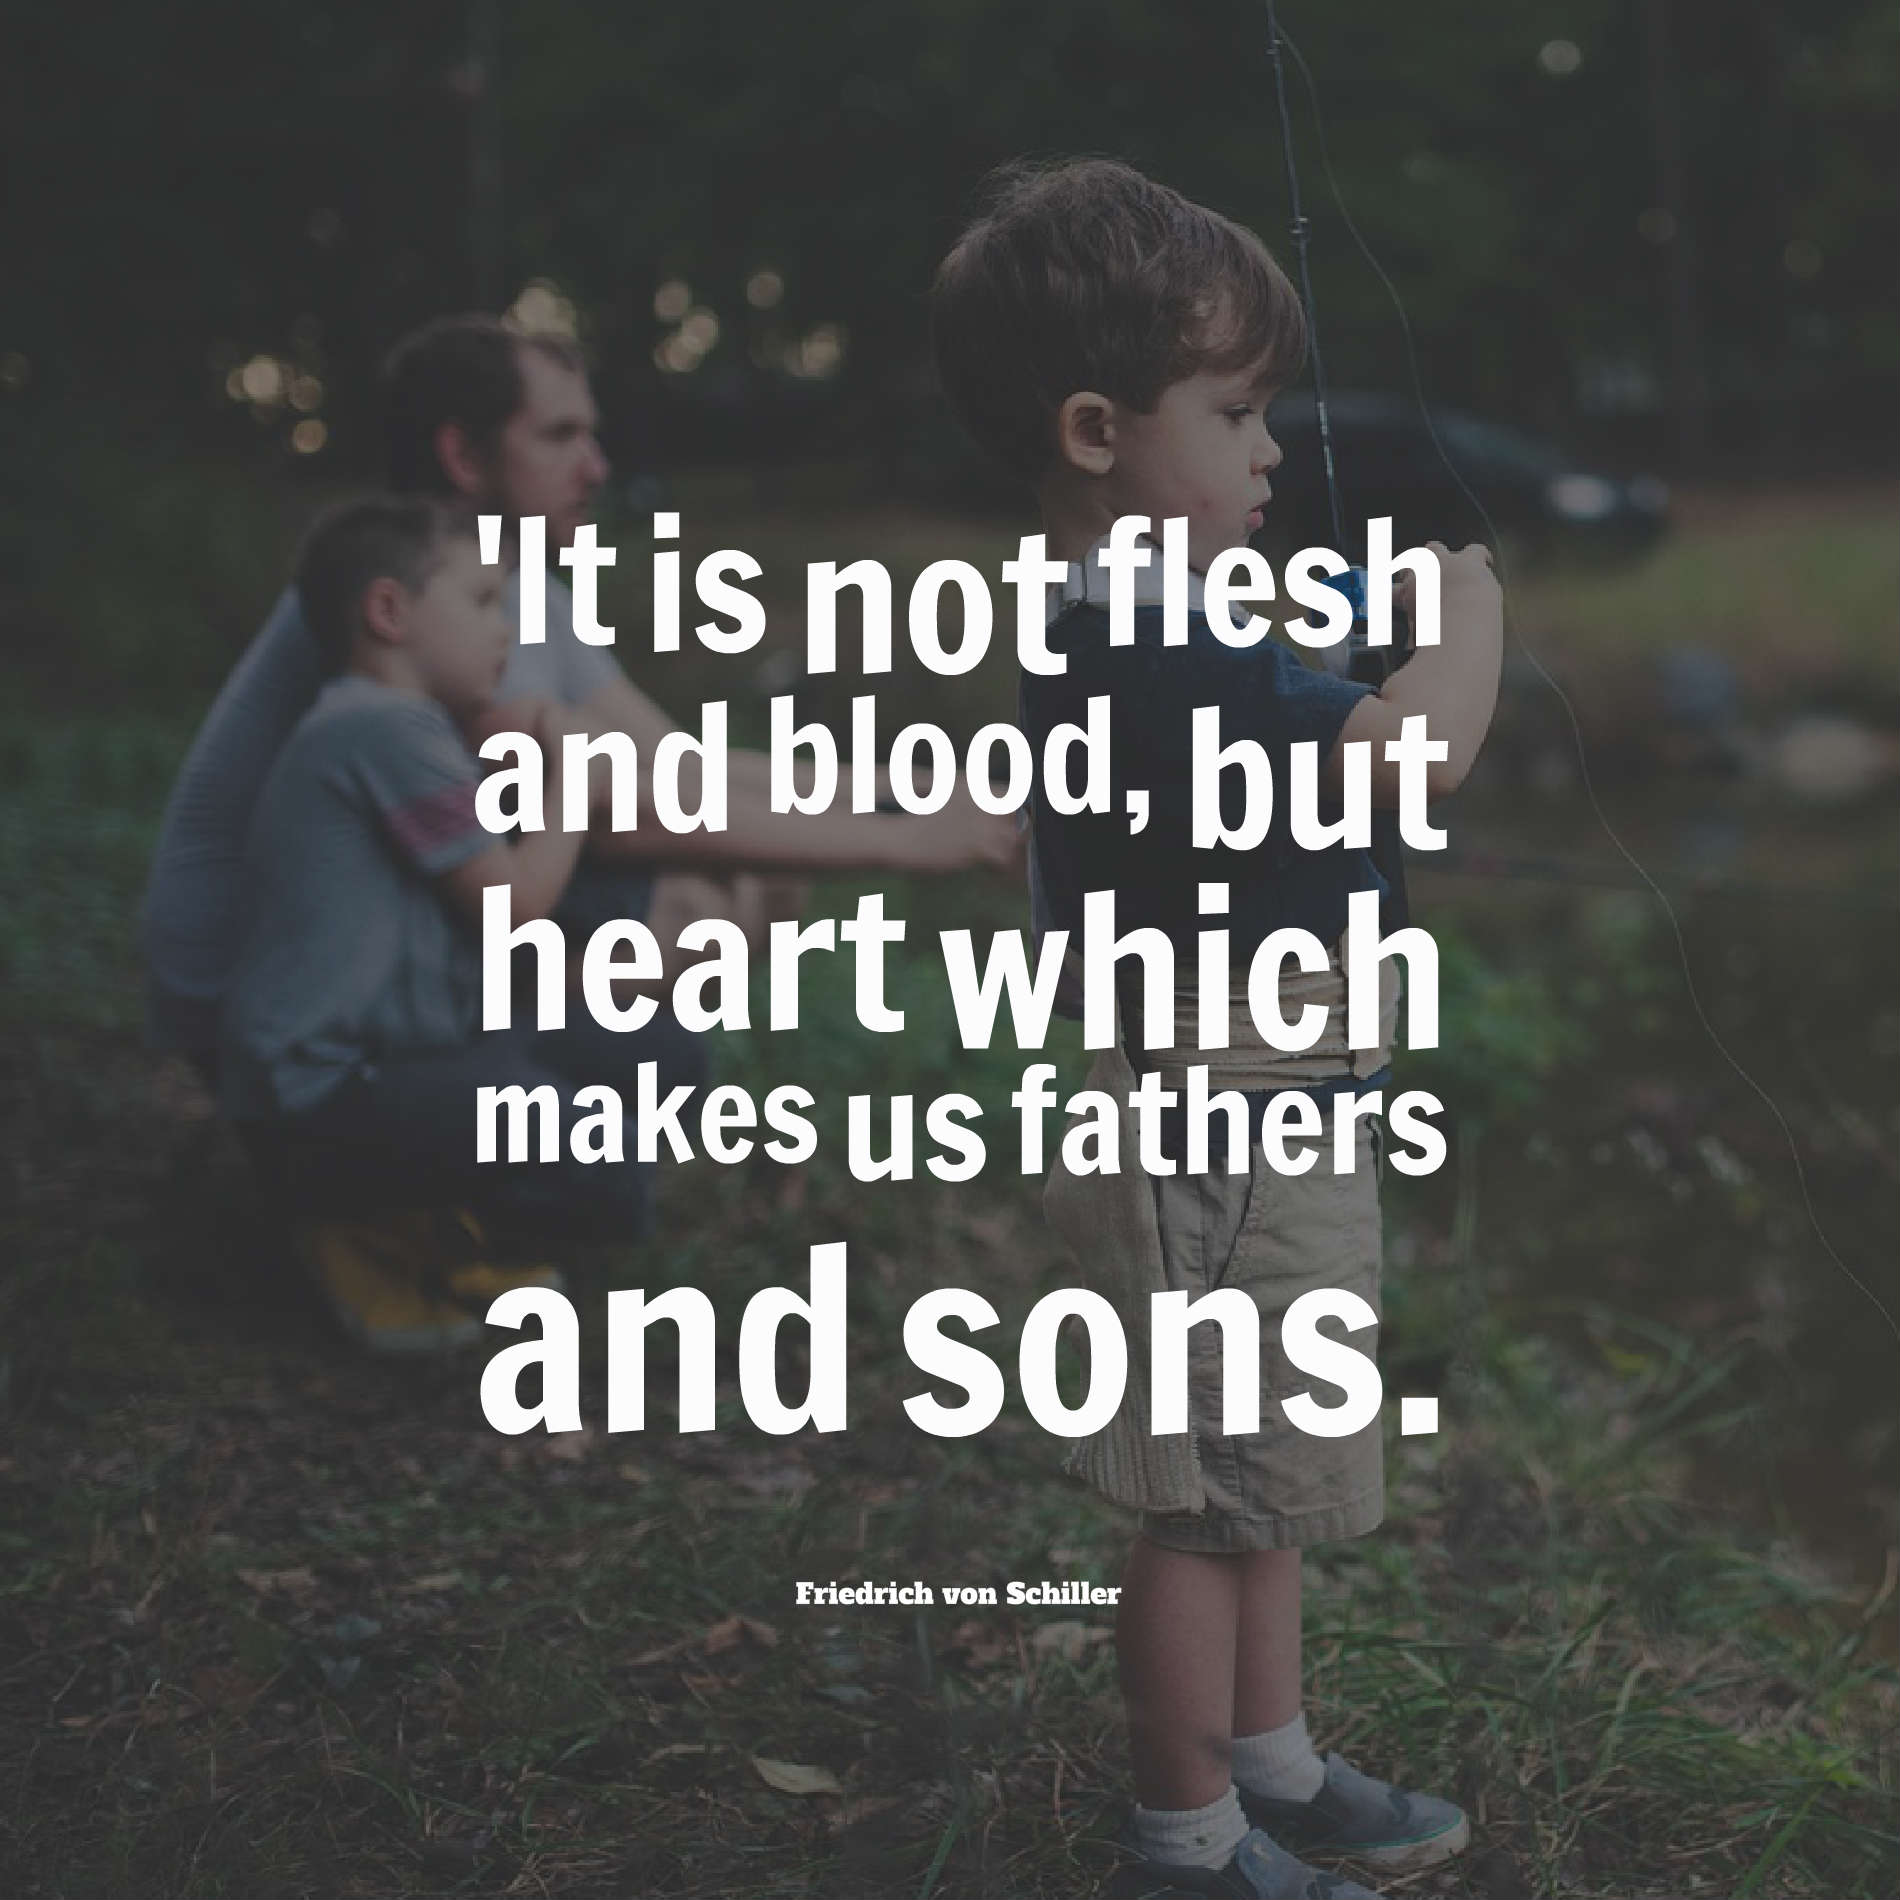 'It is not flesh and blood, but heart which makes us fathers and sons.